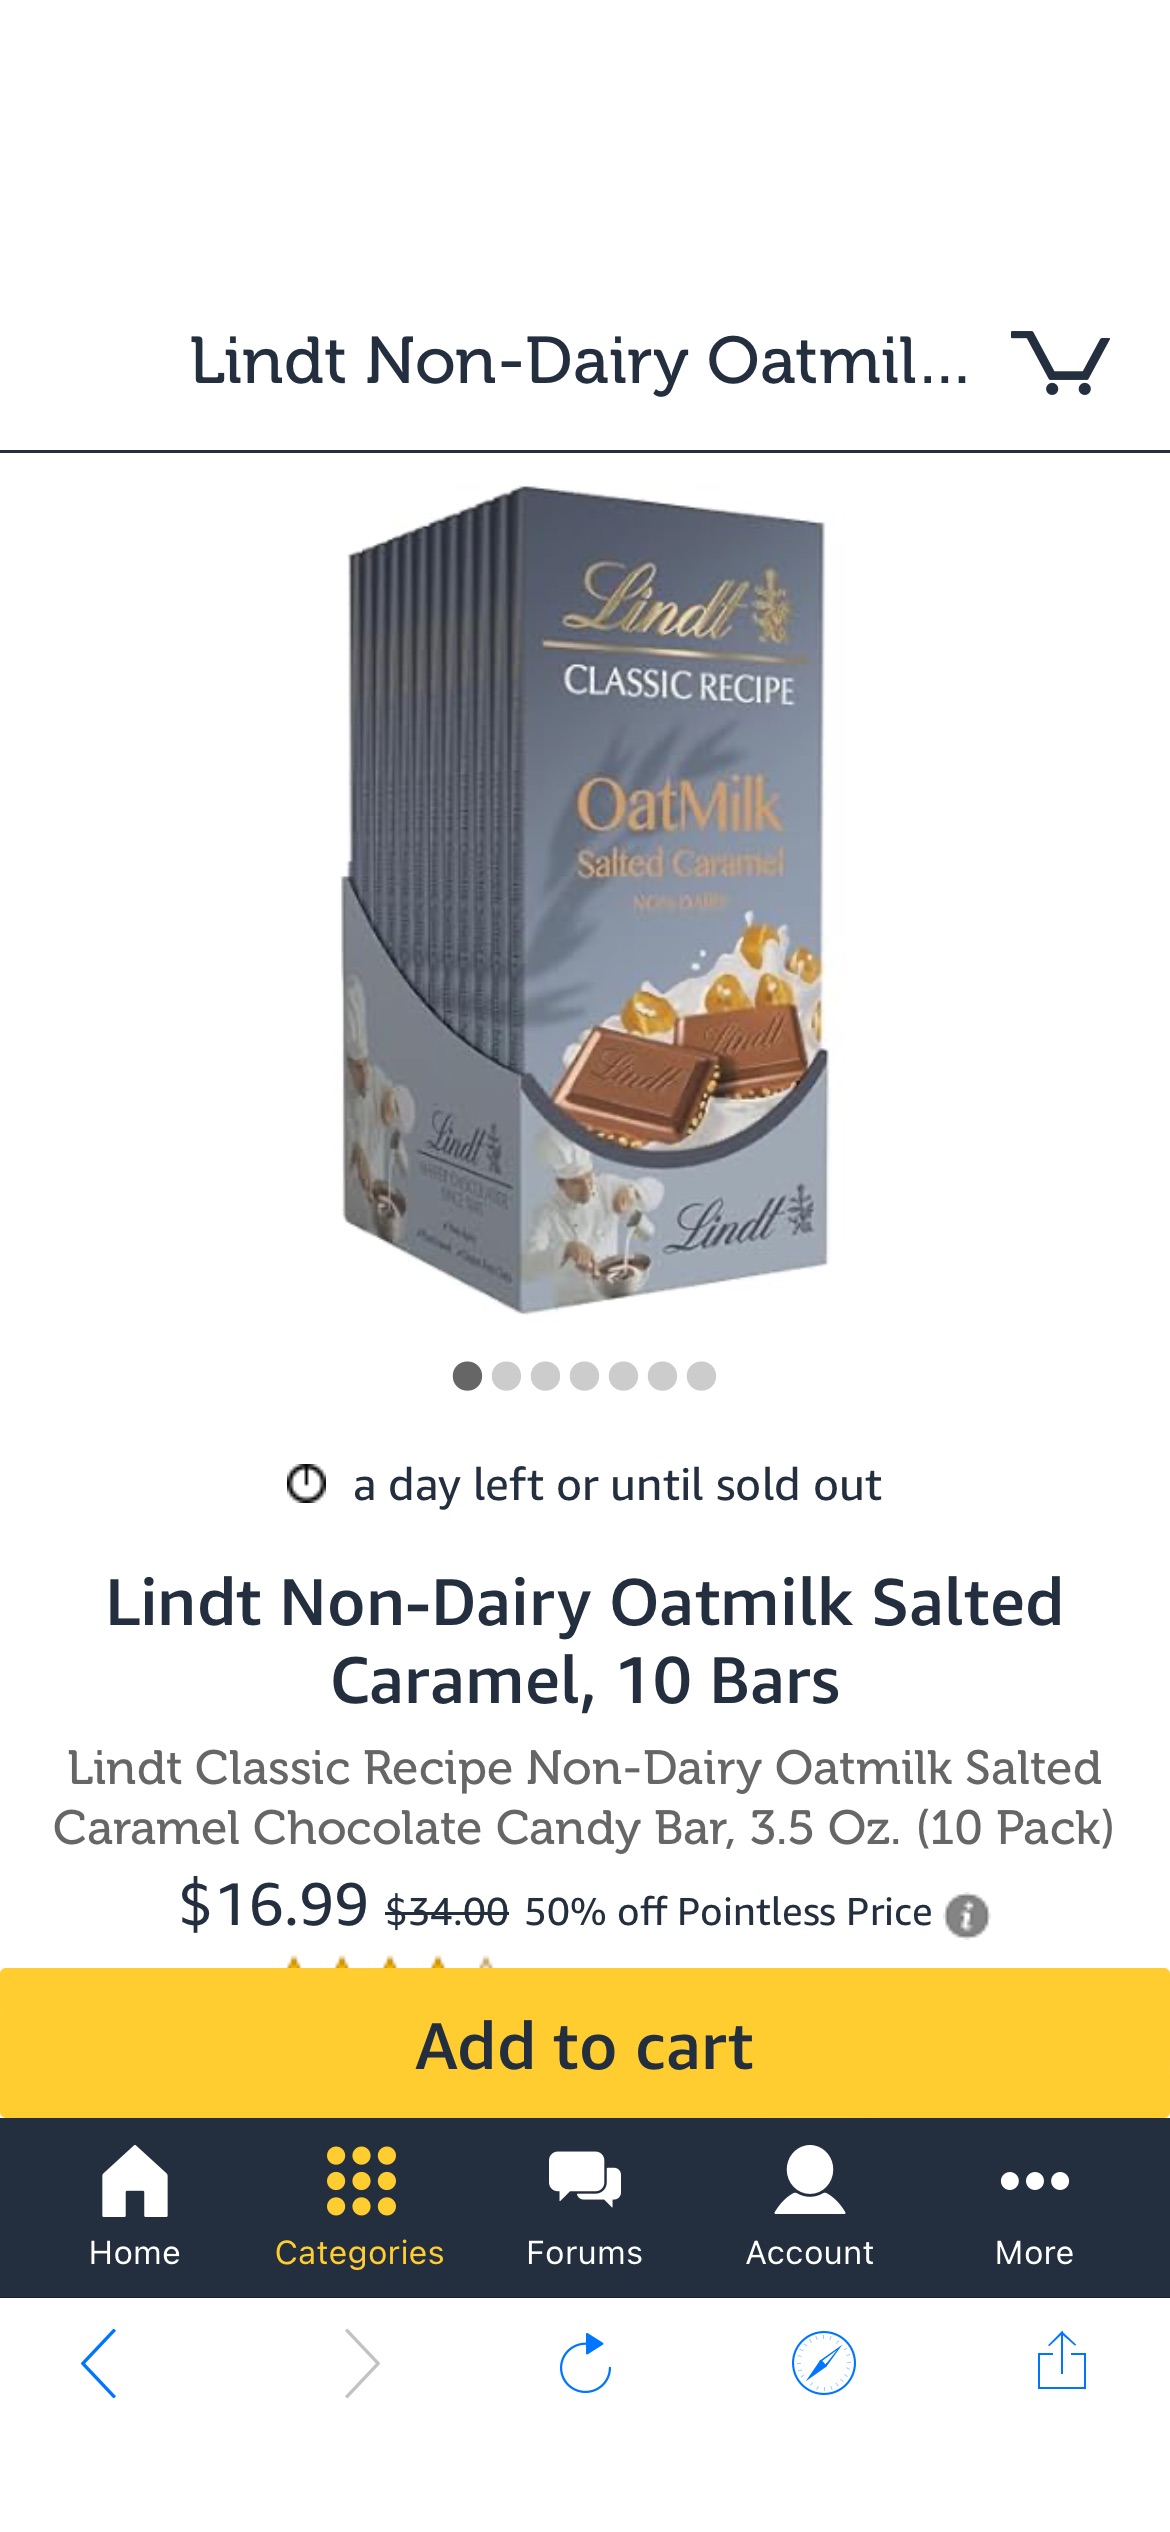 Lindt Non-Dairy Oatmilk Salted Caramel, 10 Bars